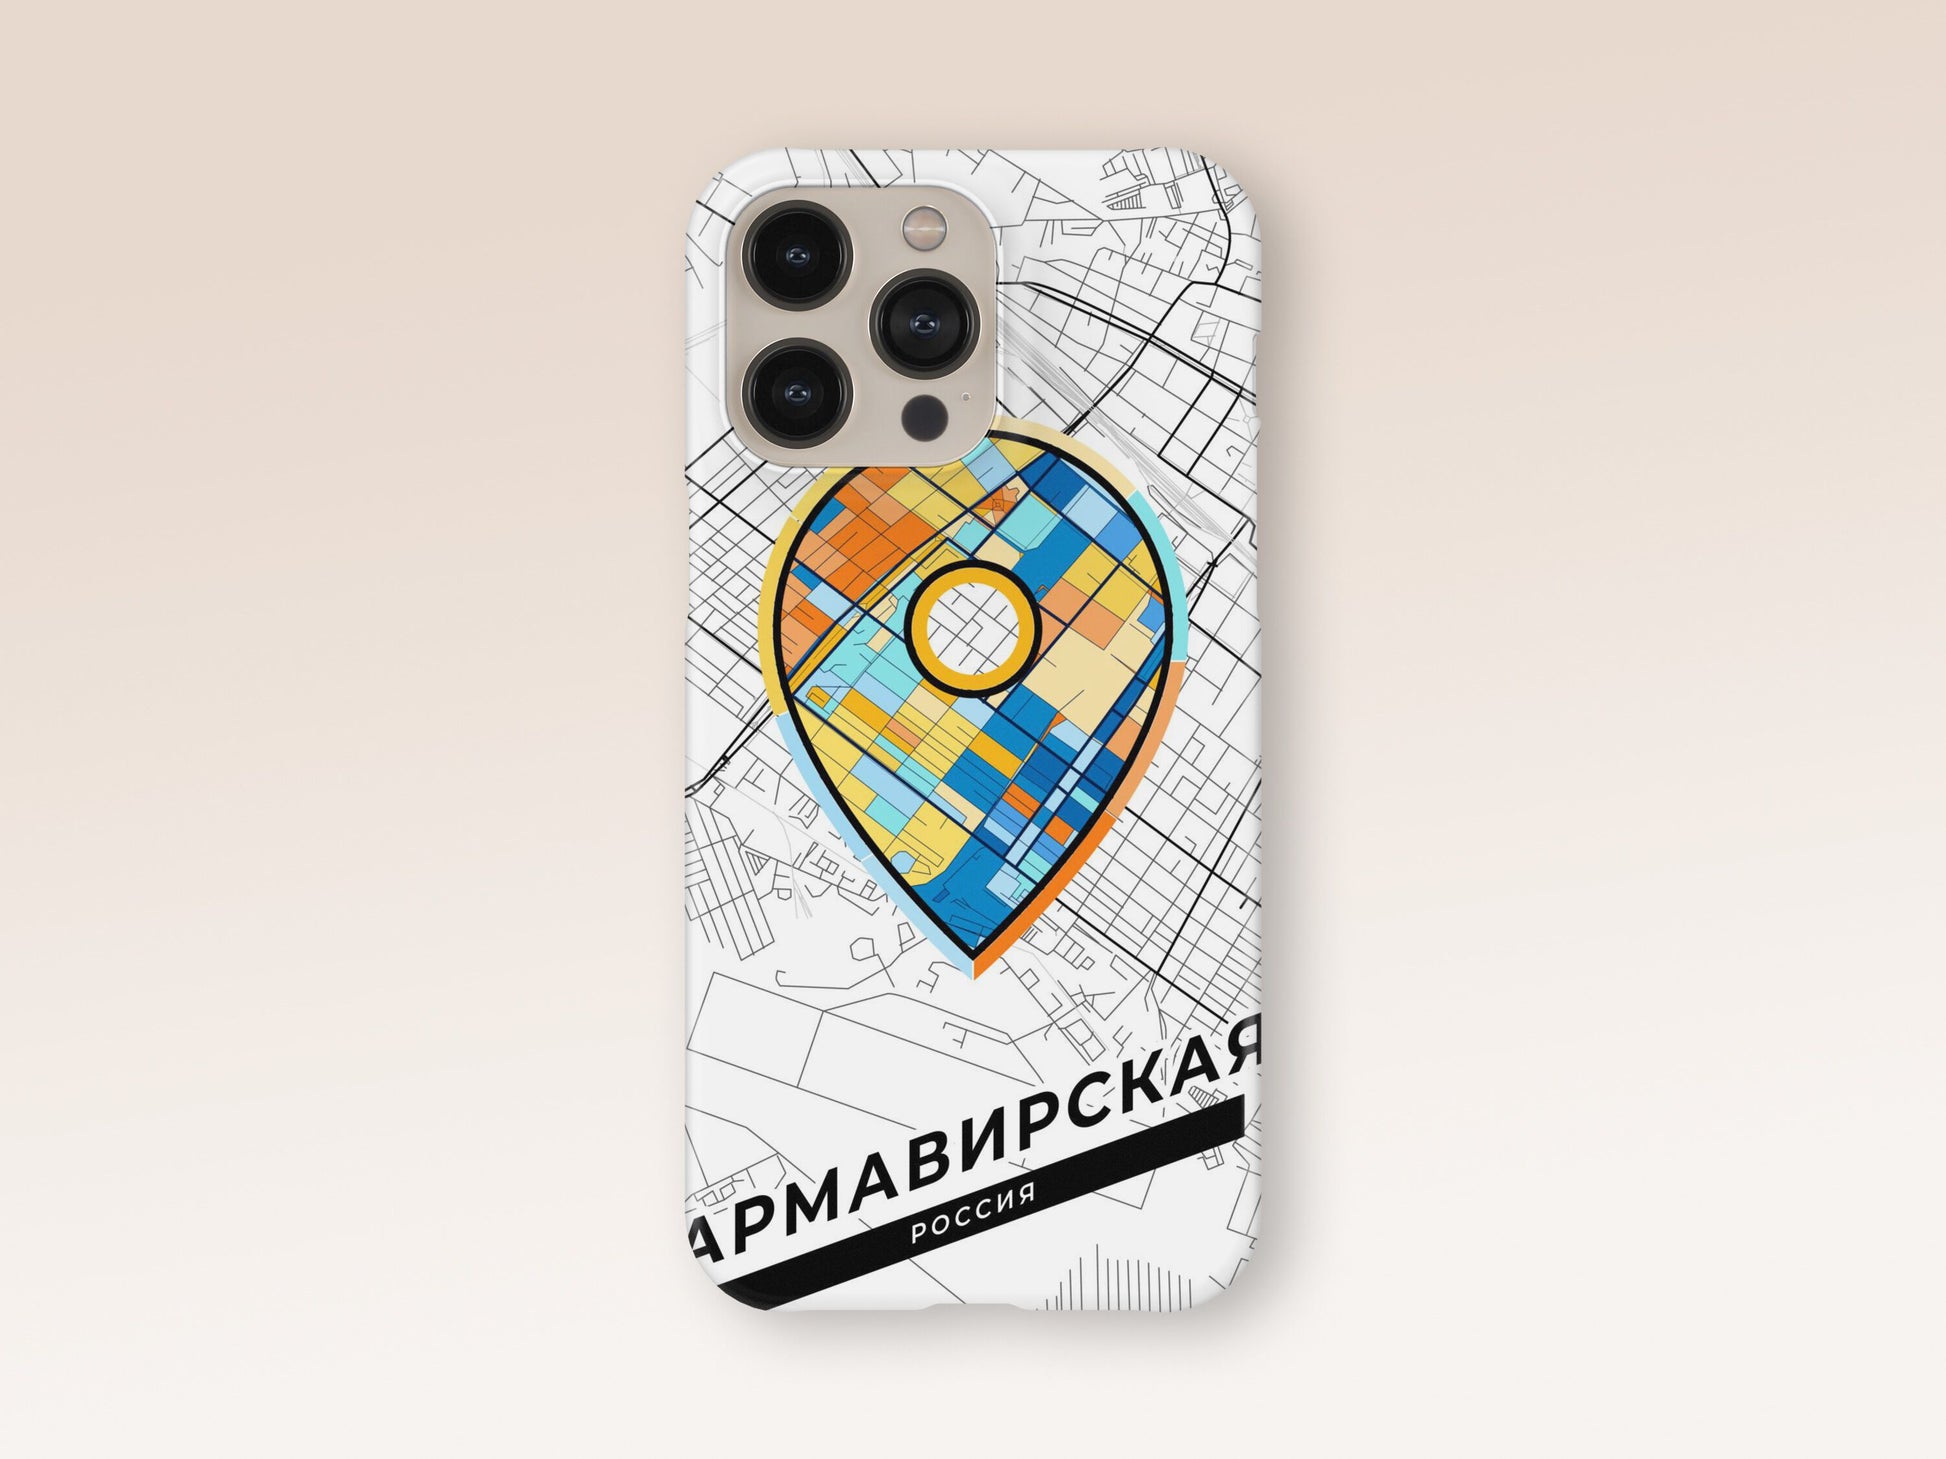 Armavir Russia slim phone case with colorful icon. Birthday, wedding or housewarming gift. Couple match cases. 1